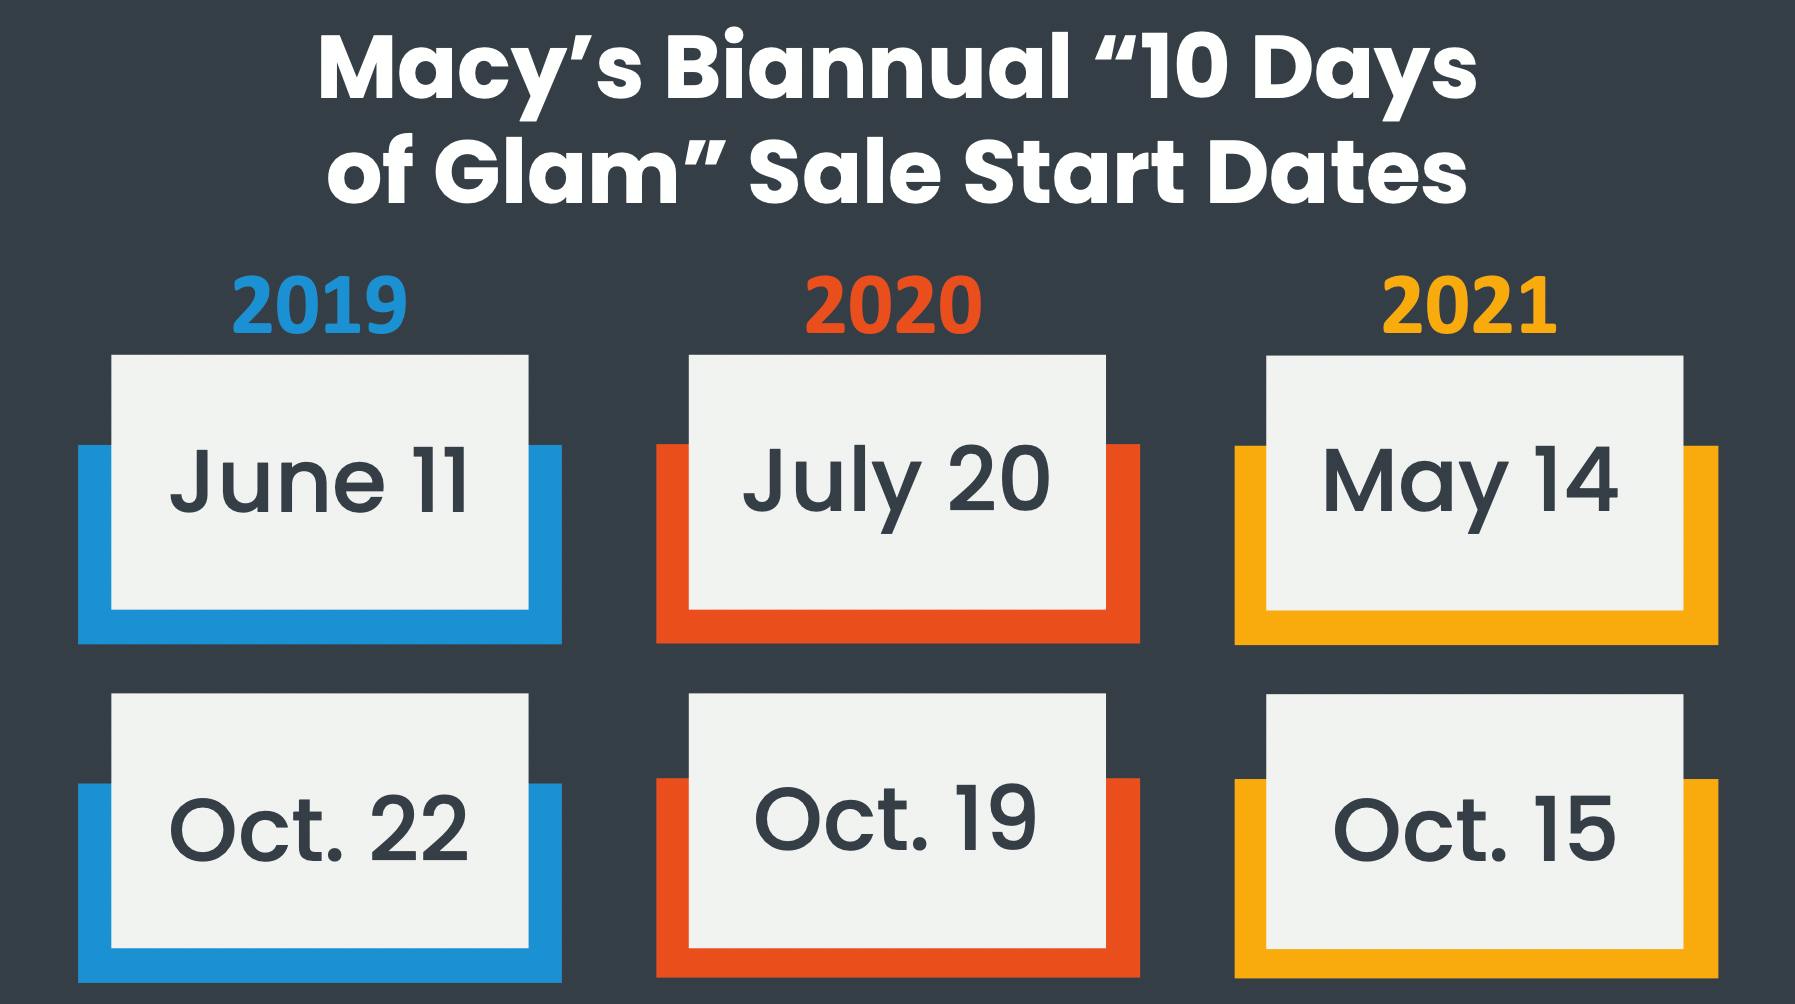 Graphic showing the start dates of Macy's 10 Days of Glam sale in 2019, 2020, and 2021